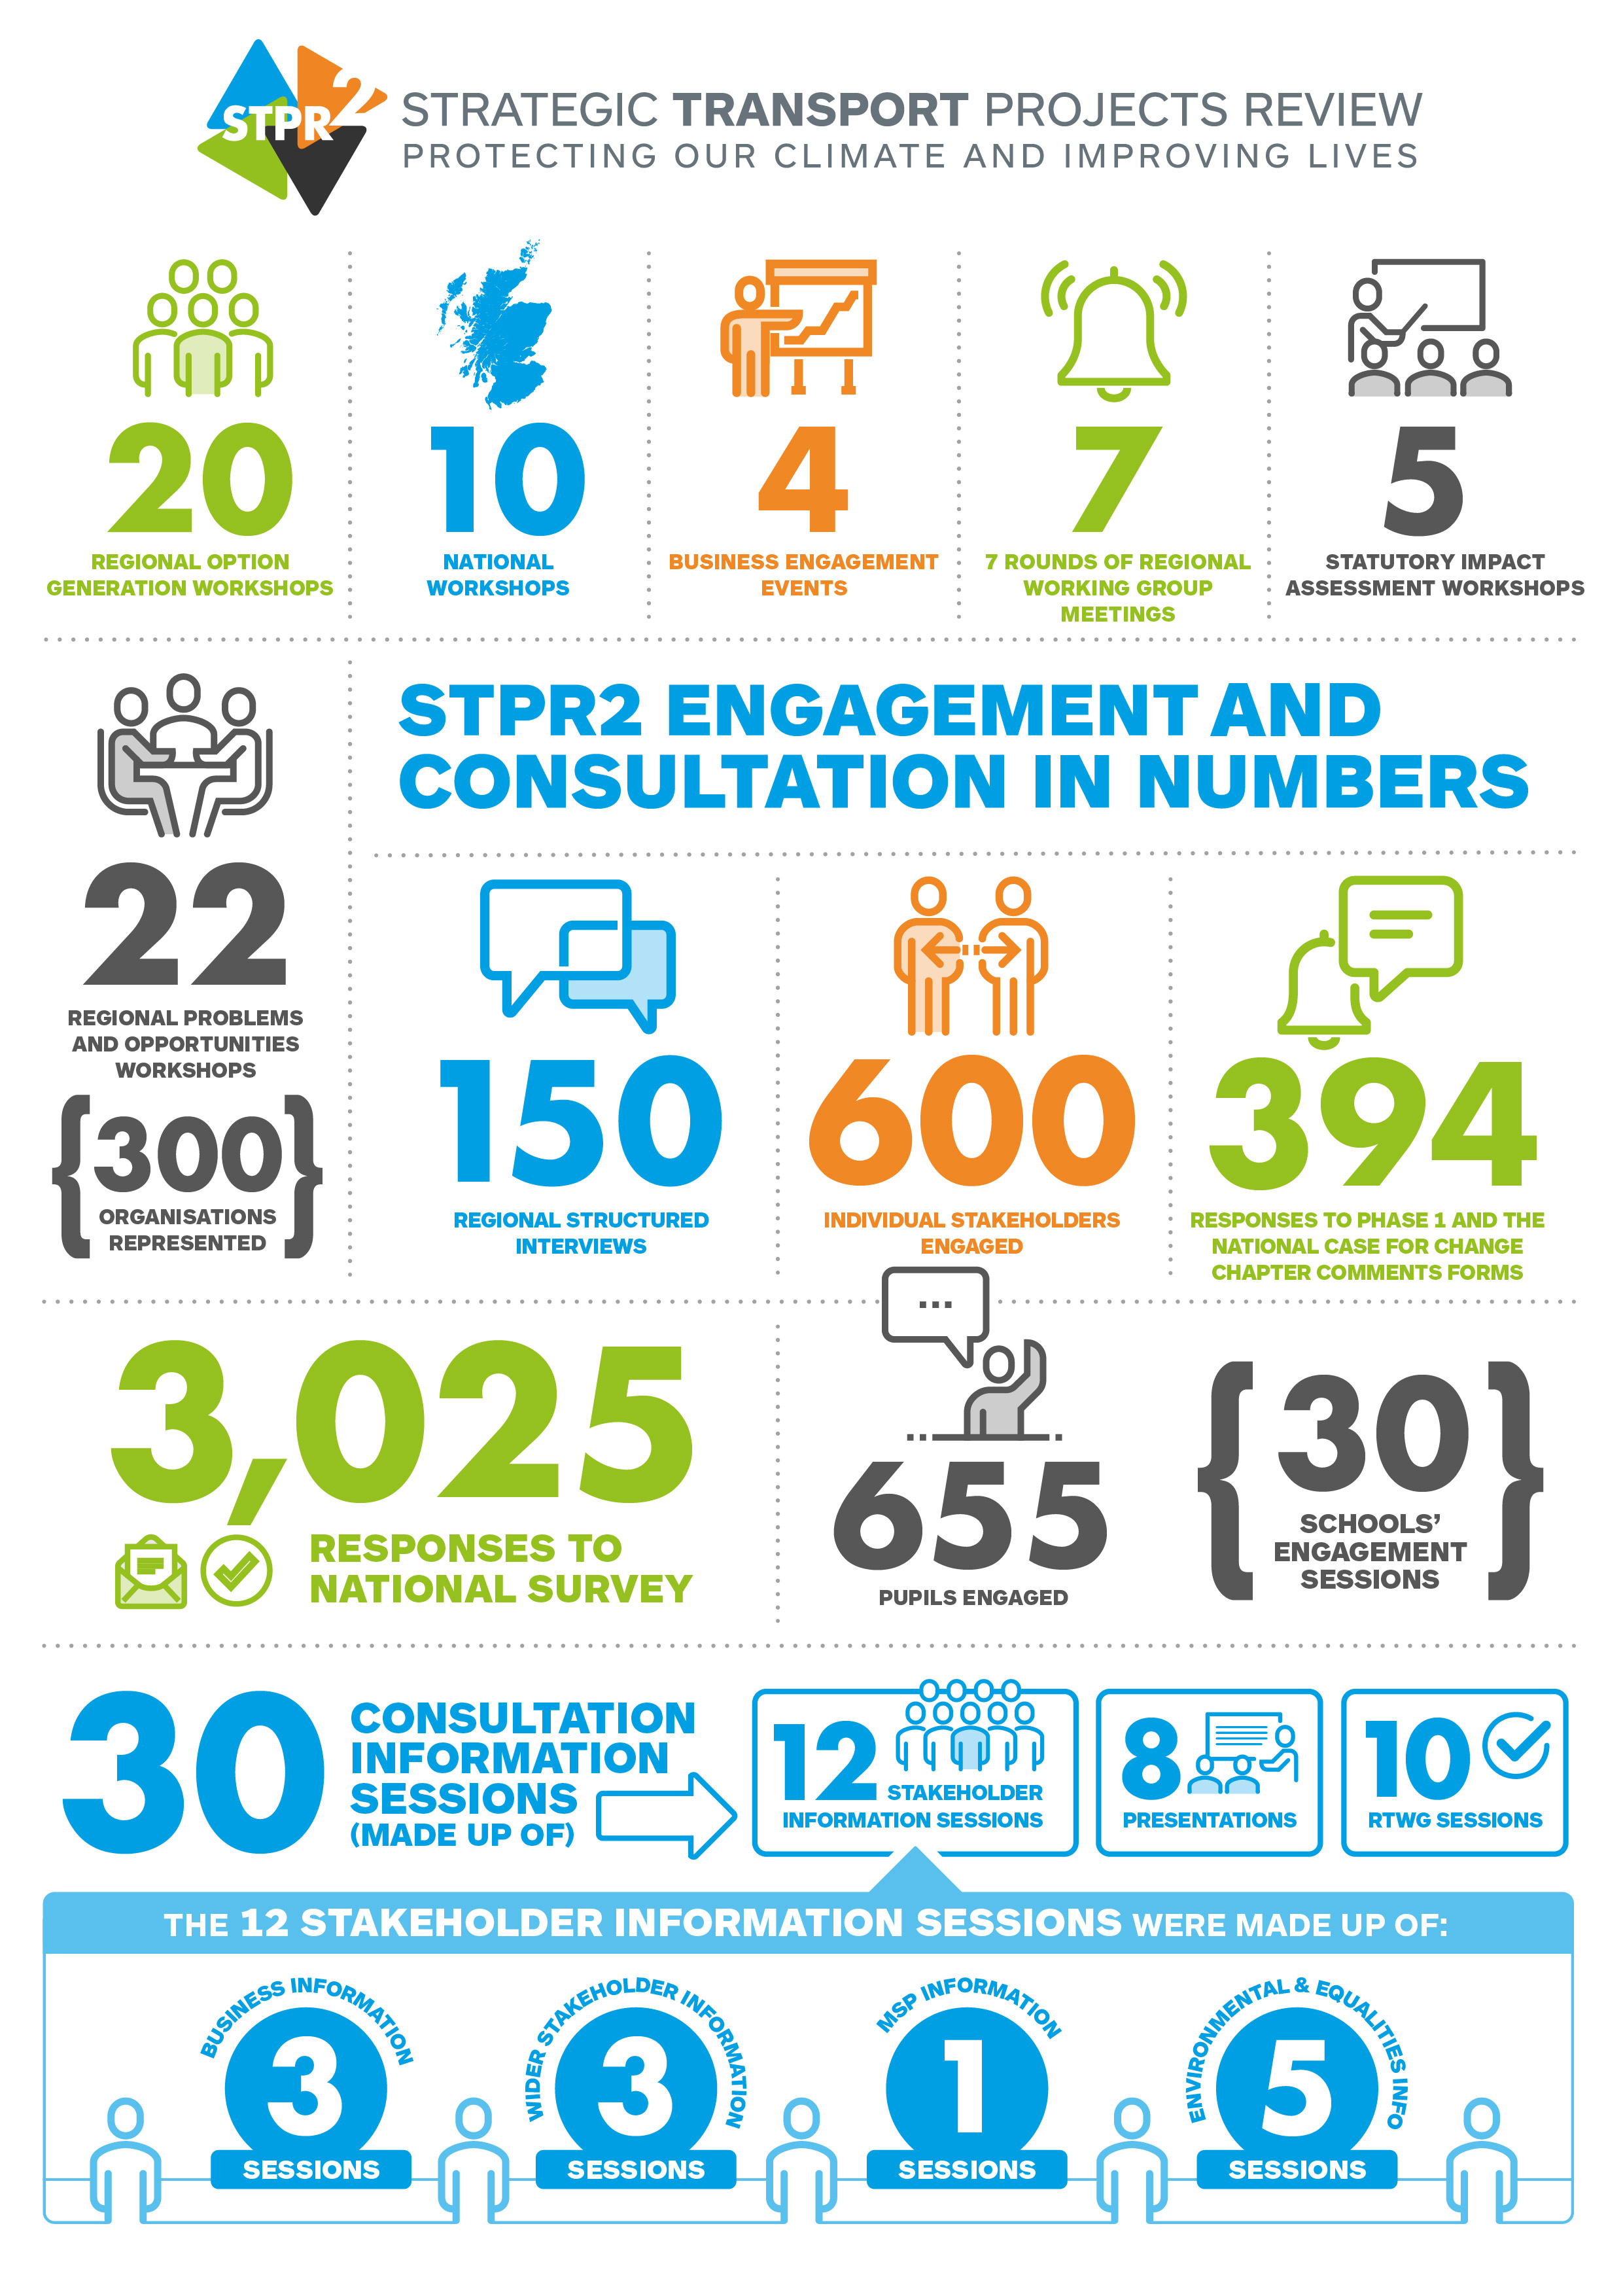 STPR2 Engagement and consultation in numbers -a content fully explained in text above